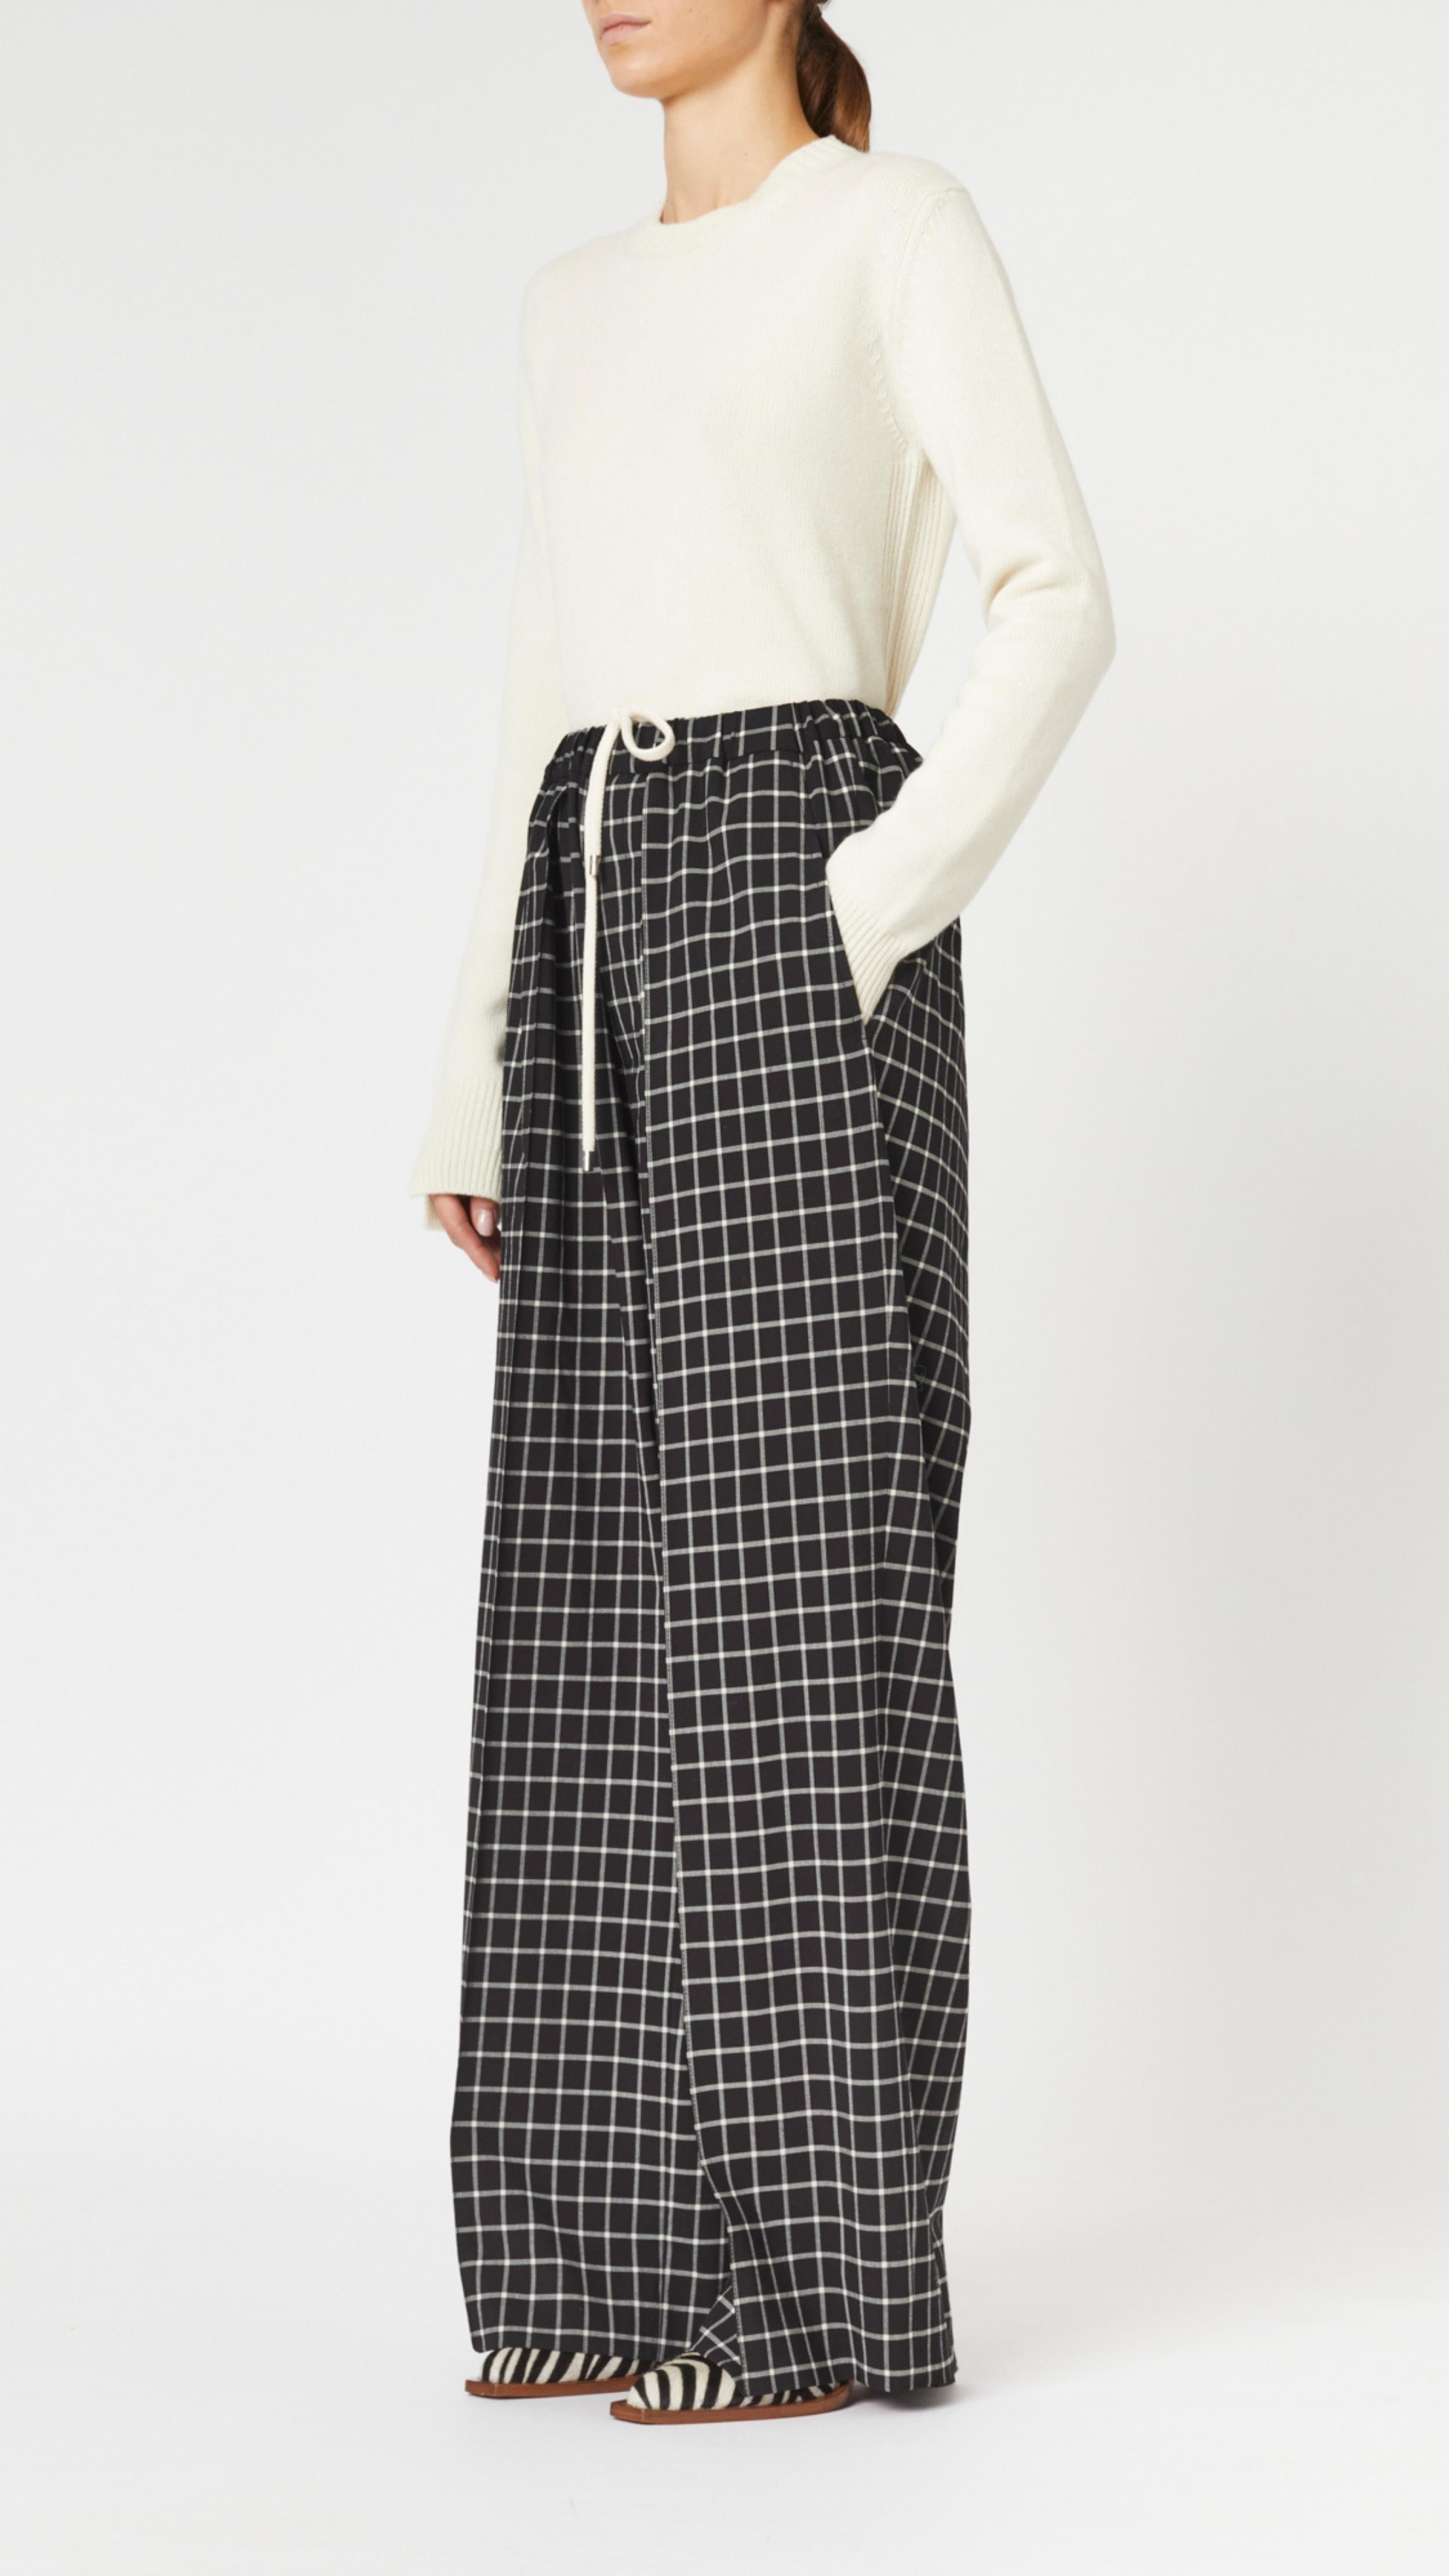 Plan C Checked Black Trousers. Loose fitting suit trousers with a drawstring adjustable waist in a classic black and white check patttern. Modern and oversized style. Shown on model facing to the side and with her hand in the pocket..